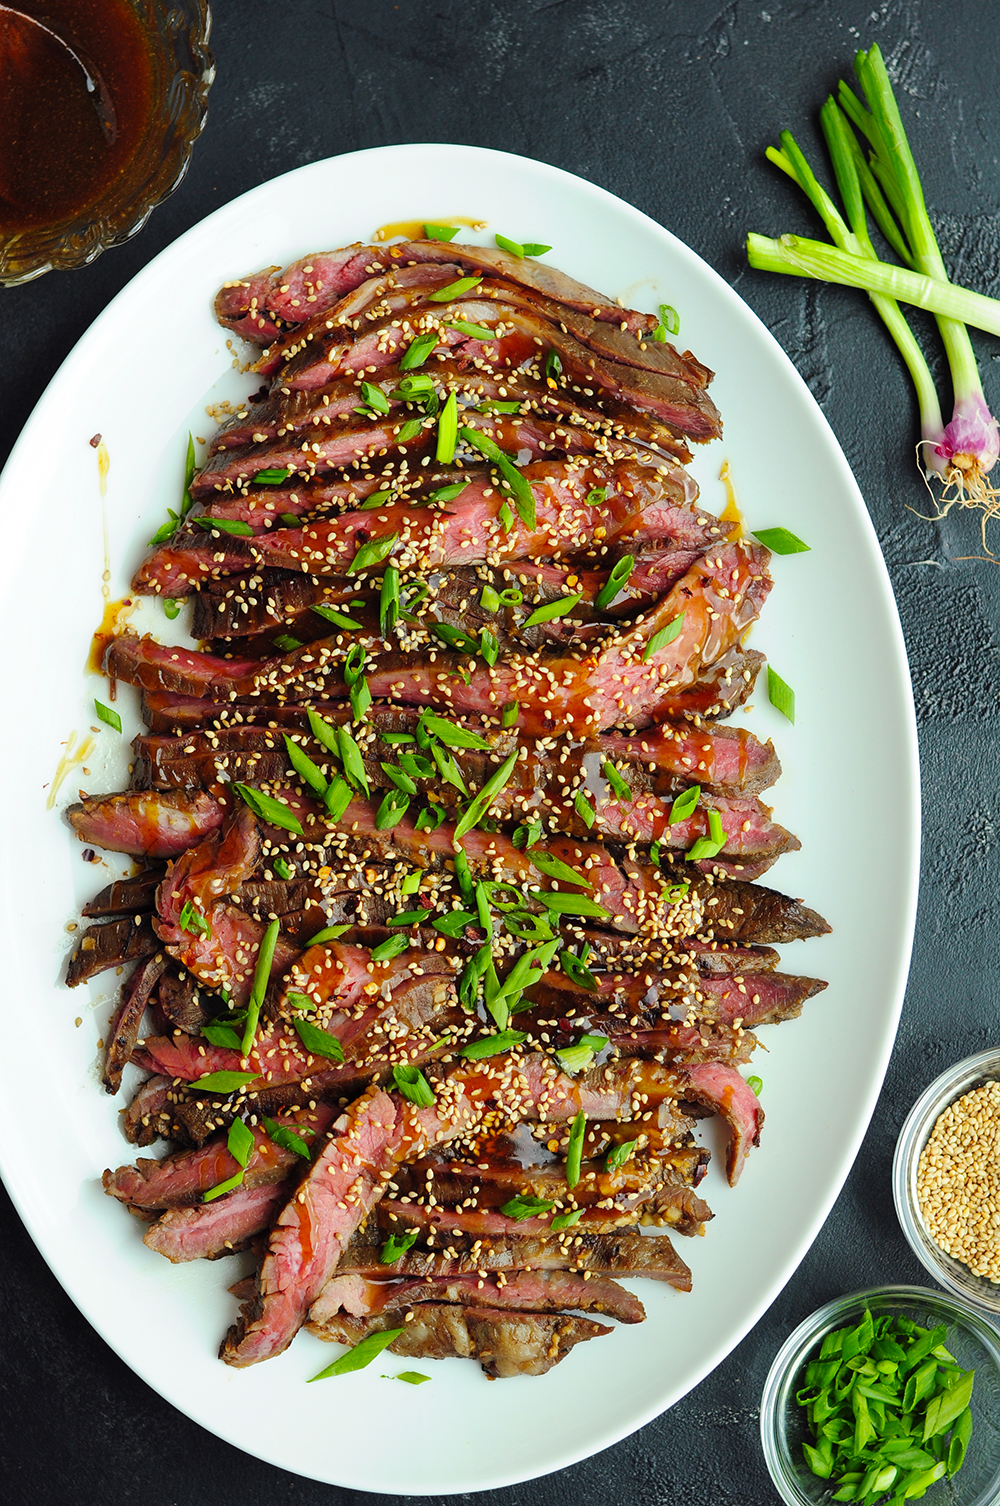 Sous vide flank steak marinated and glazed with a gluten-free Mongolian sauce! Learn how to make this scrumptious recipe with just seven ingredients.